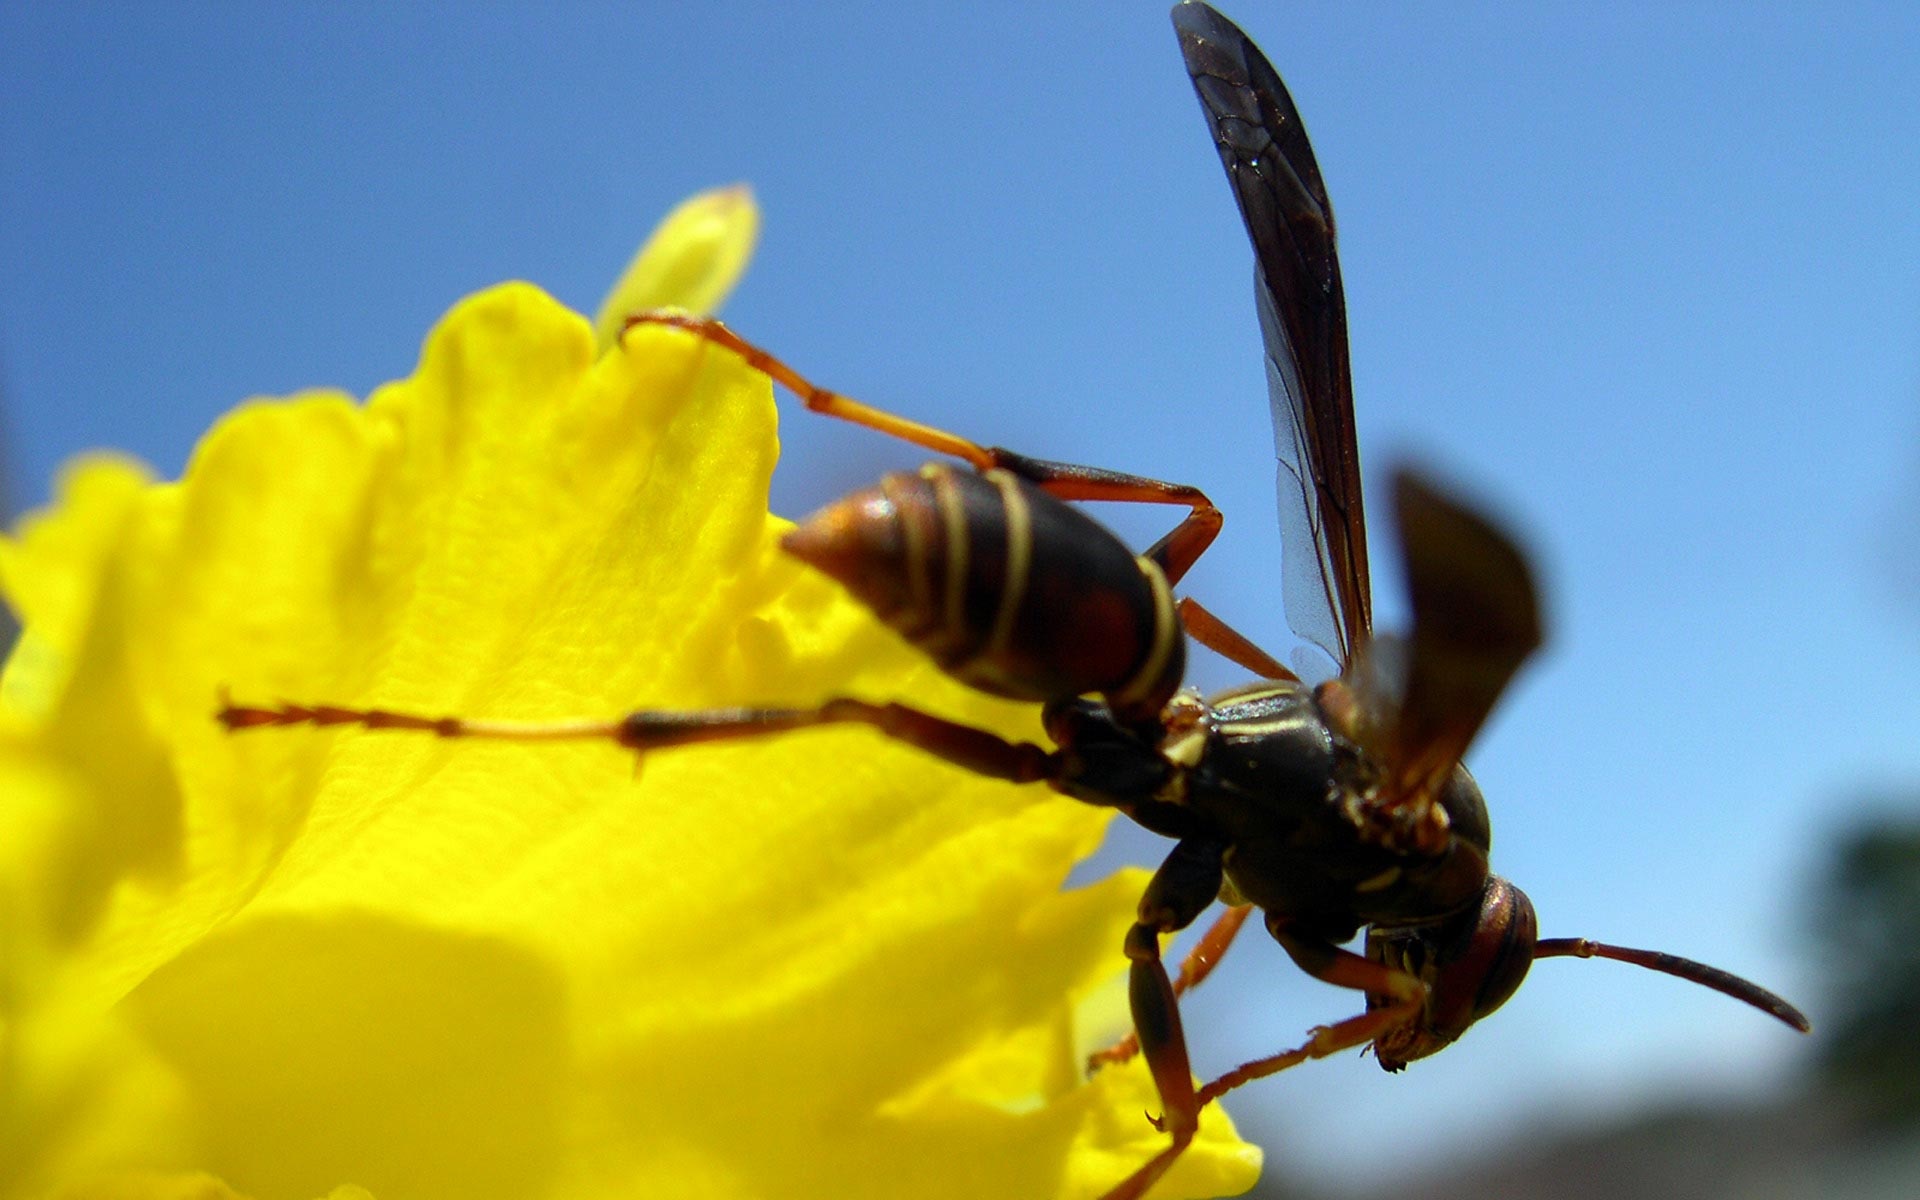 Wasp wallpapers, Insect beauty, Nature's tiny warriors, 4K resolution, 1920x1200 HD Desktop